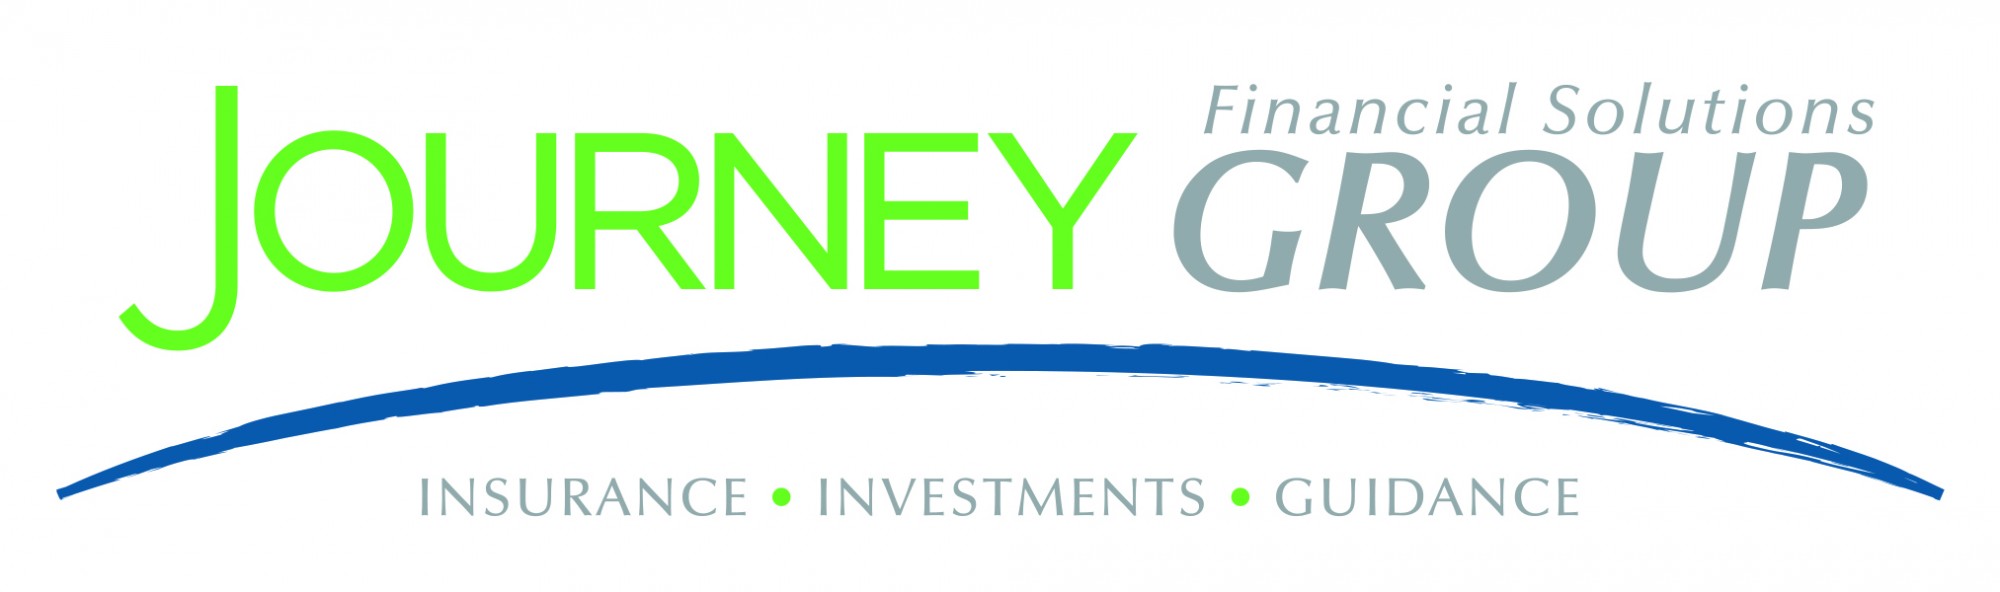 Journey Financial Solutions Group